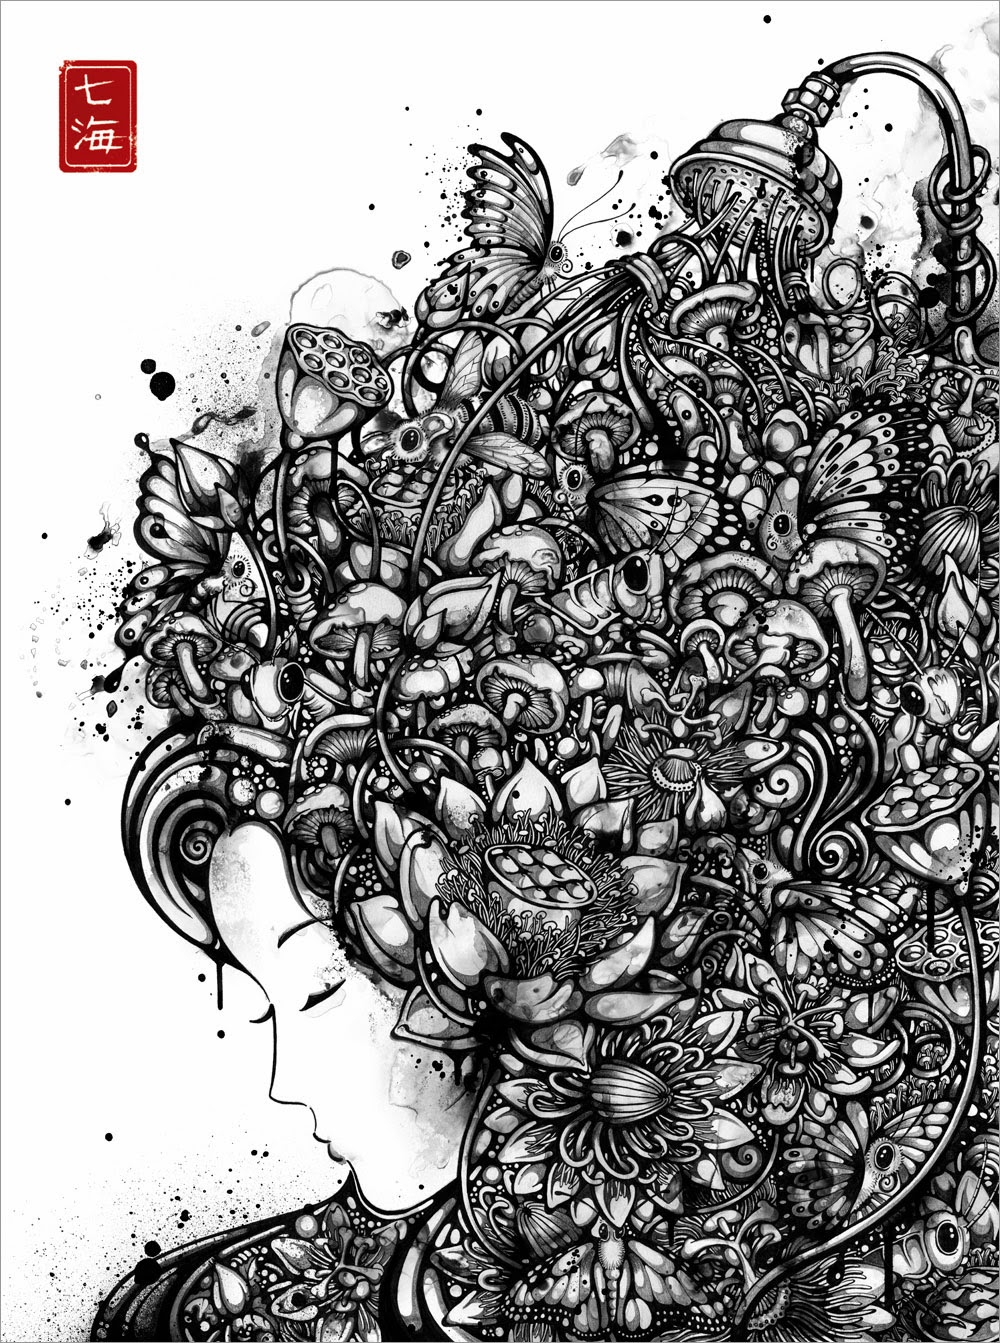 04-Flower-Shower-Nanami-Cowdroy-Splashes-of-Ink-Drawings-www-designstack-co